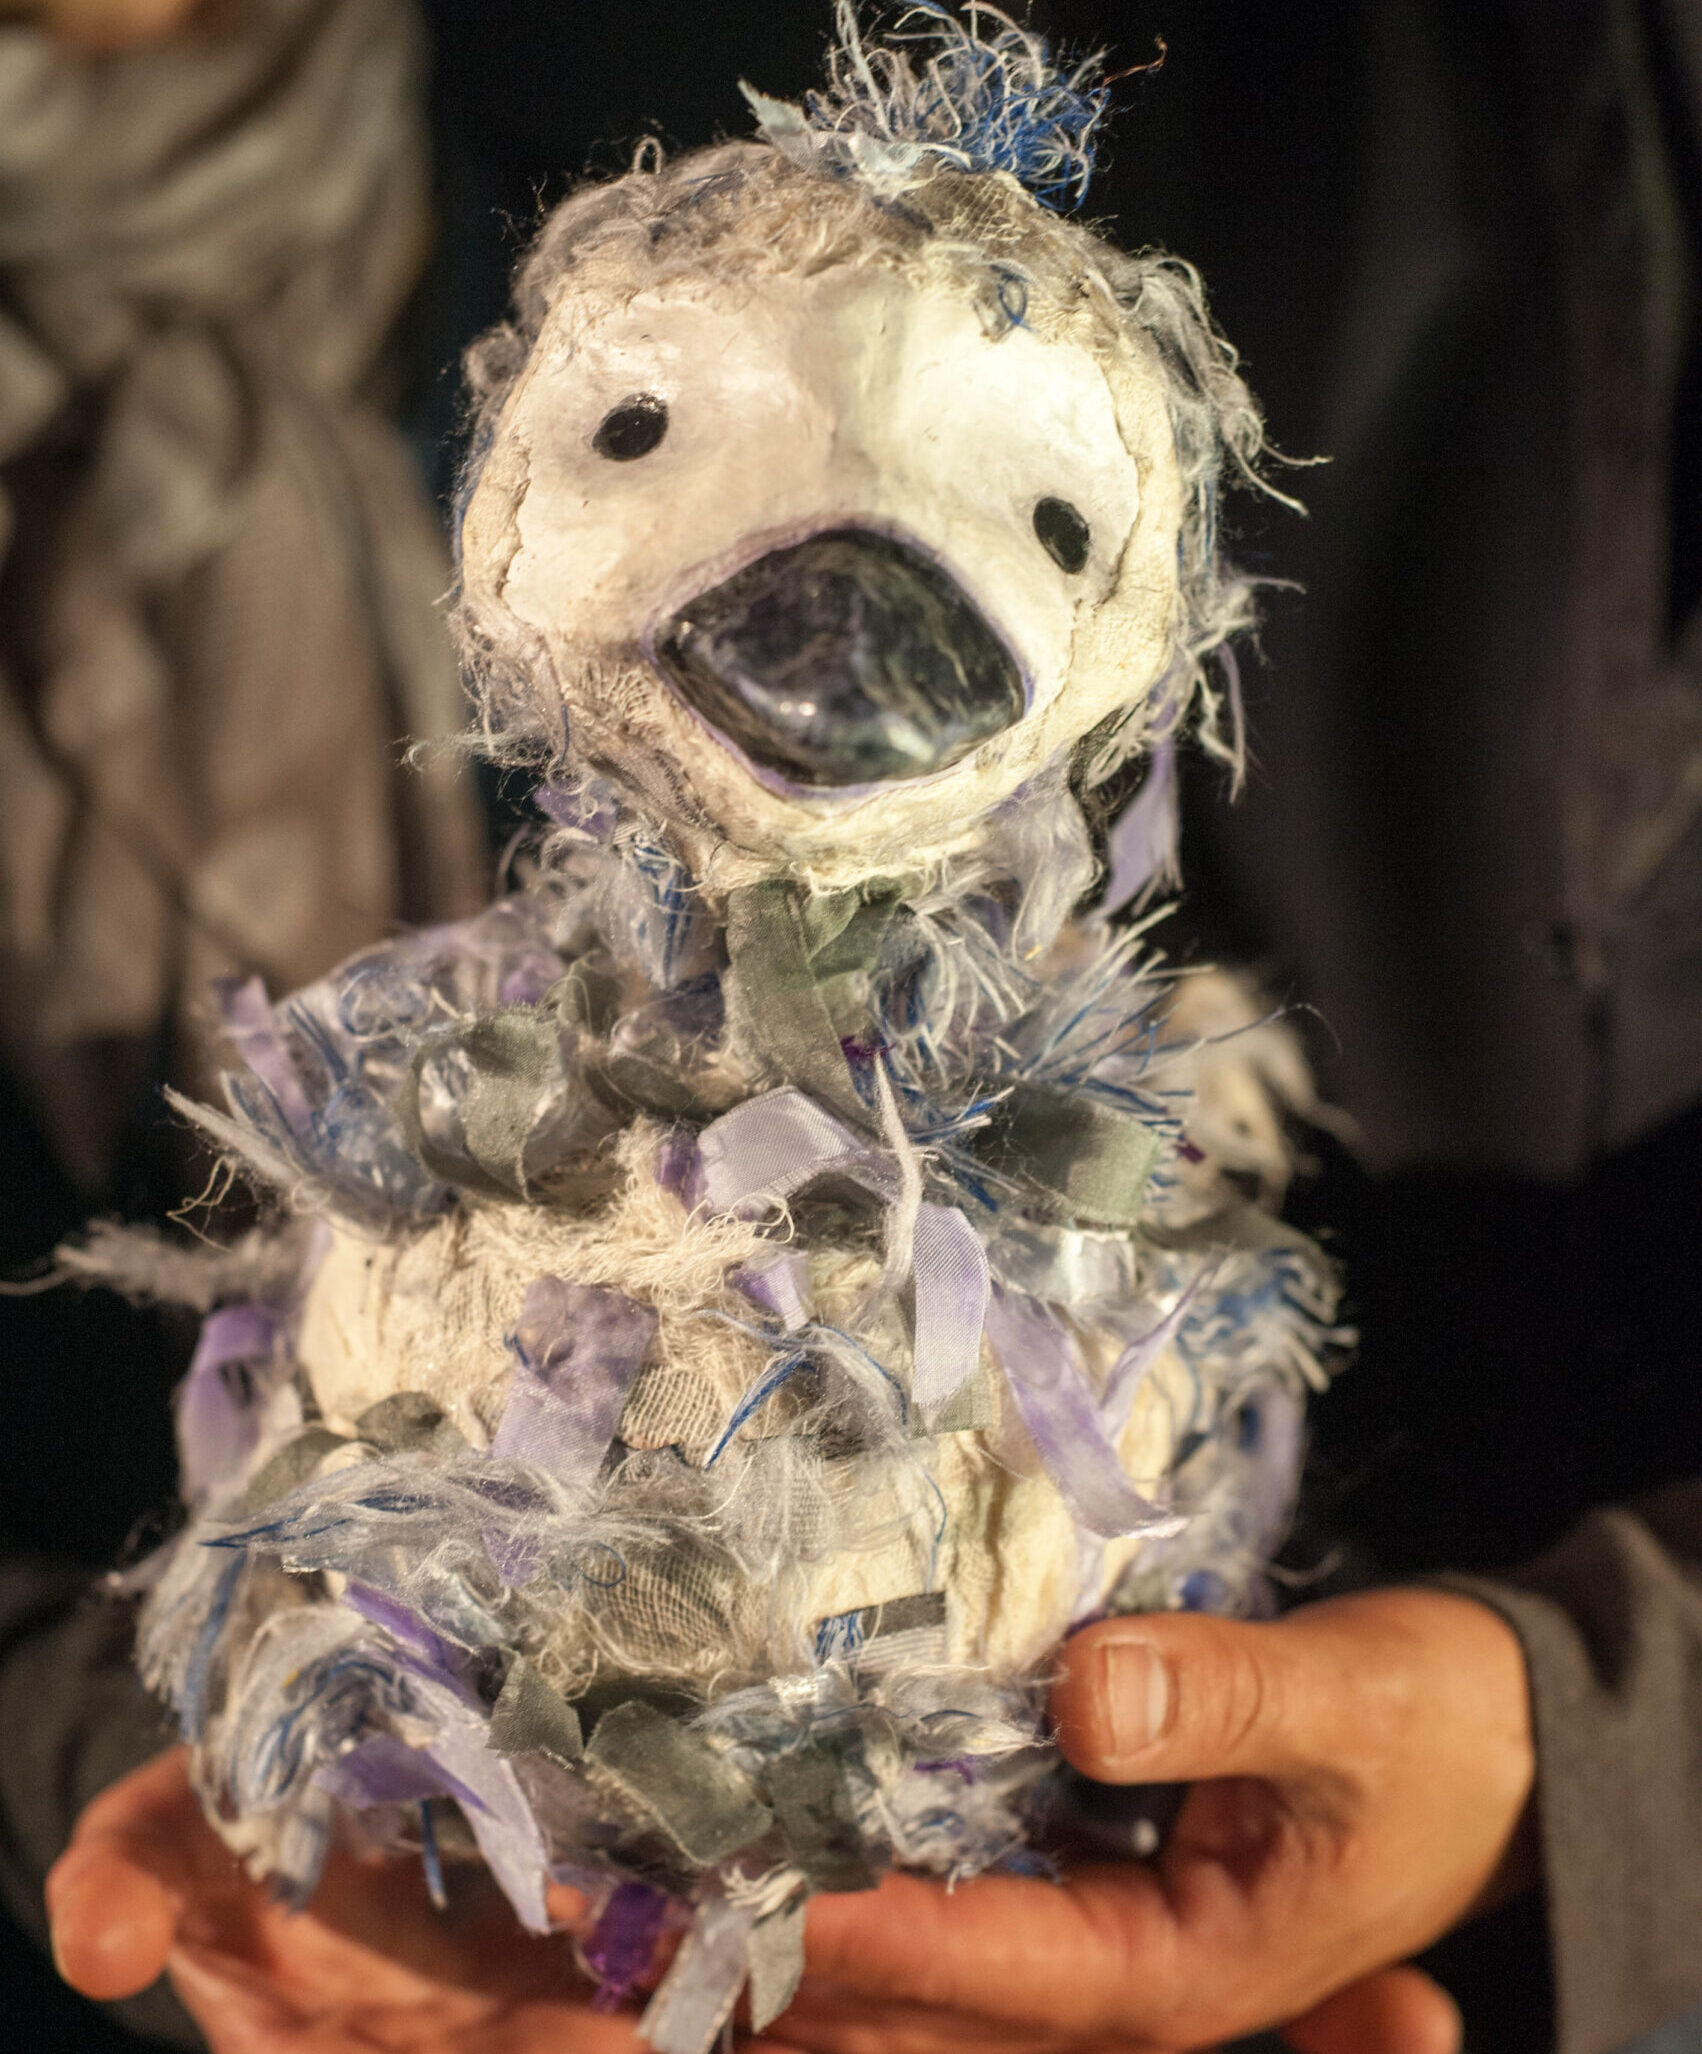 A bird puppet sits in a pair of hands